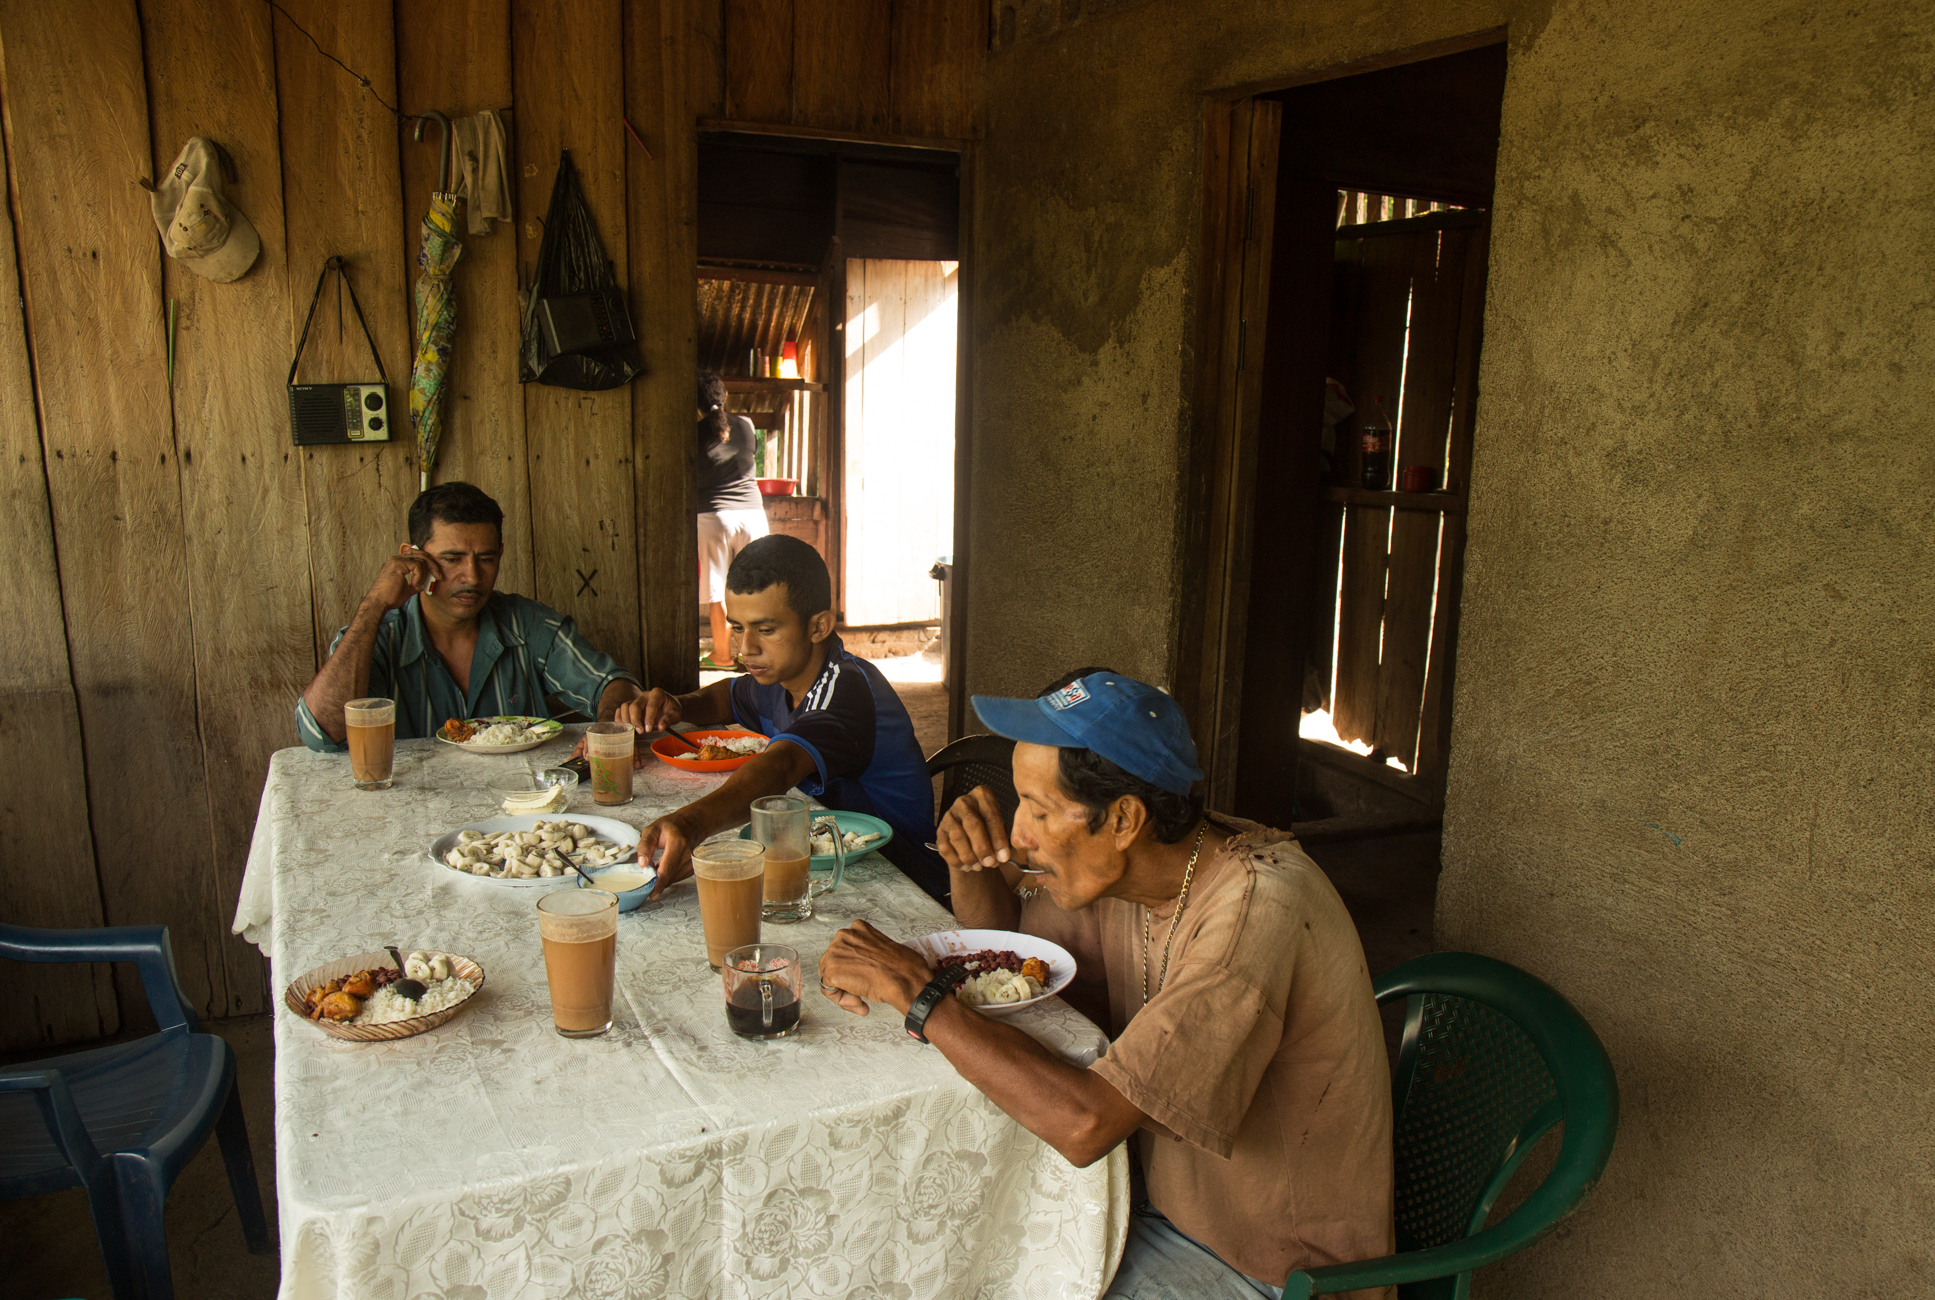  Javier Carmona eats breakfast with his sons Elder and Marcos the morning of a protest in nearby El Tule against the Nicaraguan Canal project and the Ley 840. Javier, a community leader and organizer with the Consejo Nacional which is fighting agains